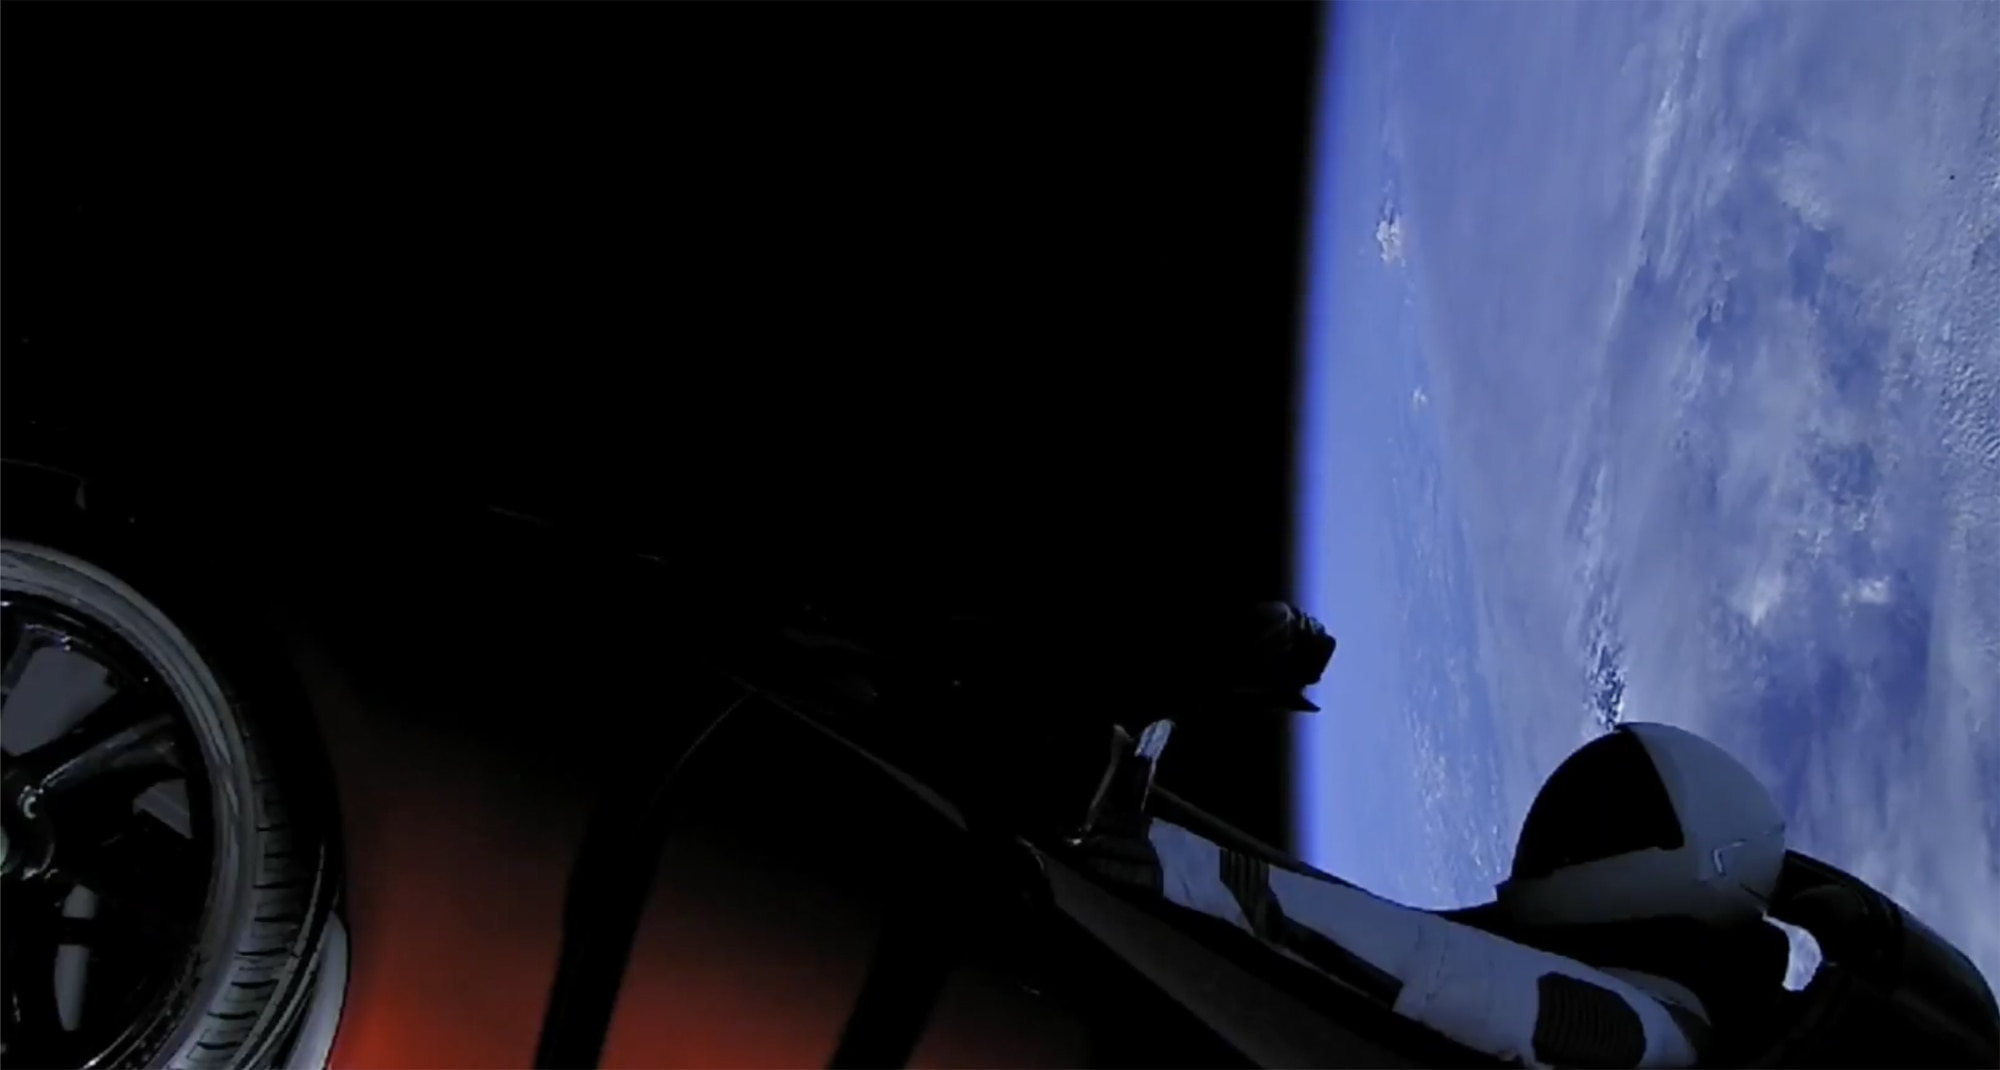 Floating in a tin can: Starman and the Roadster seemingly about to drive to Mars. Credit: SpaceX